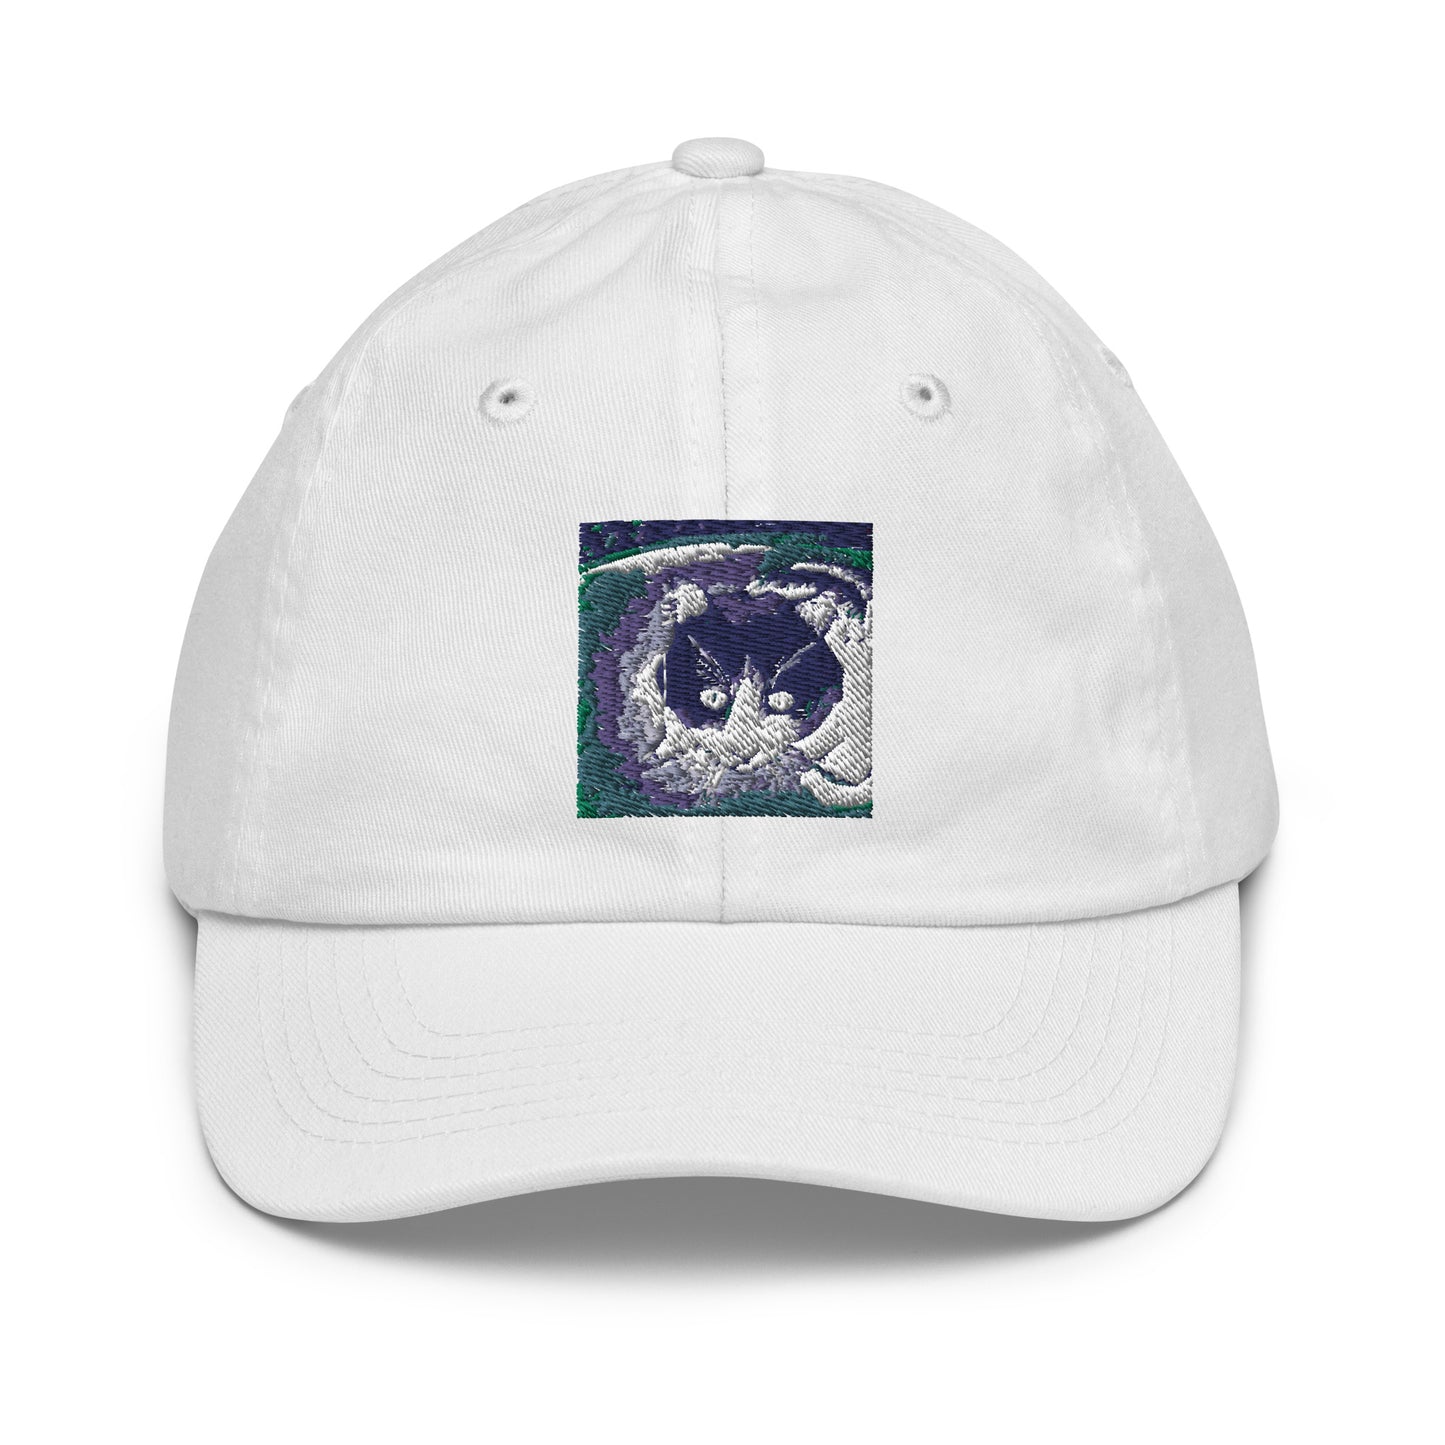 Black and White, Cat in Green Grass Youth baseball cap